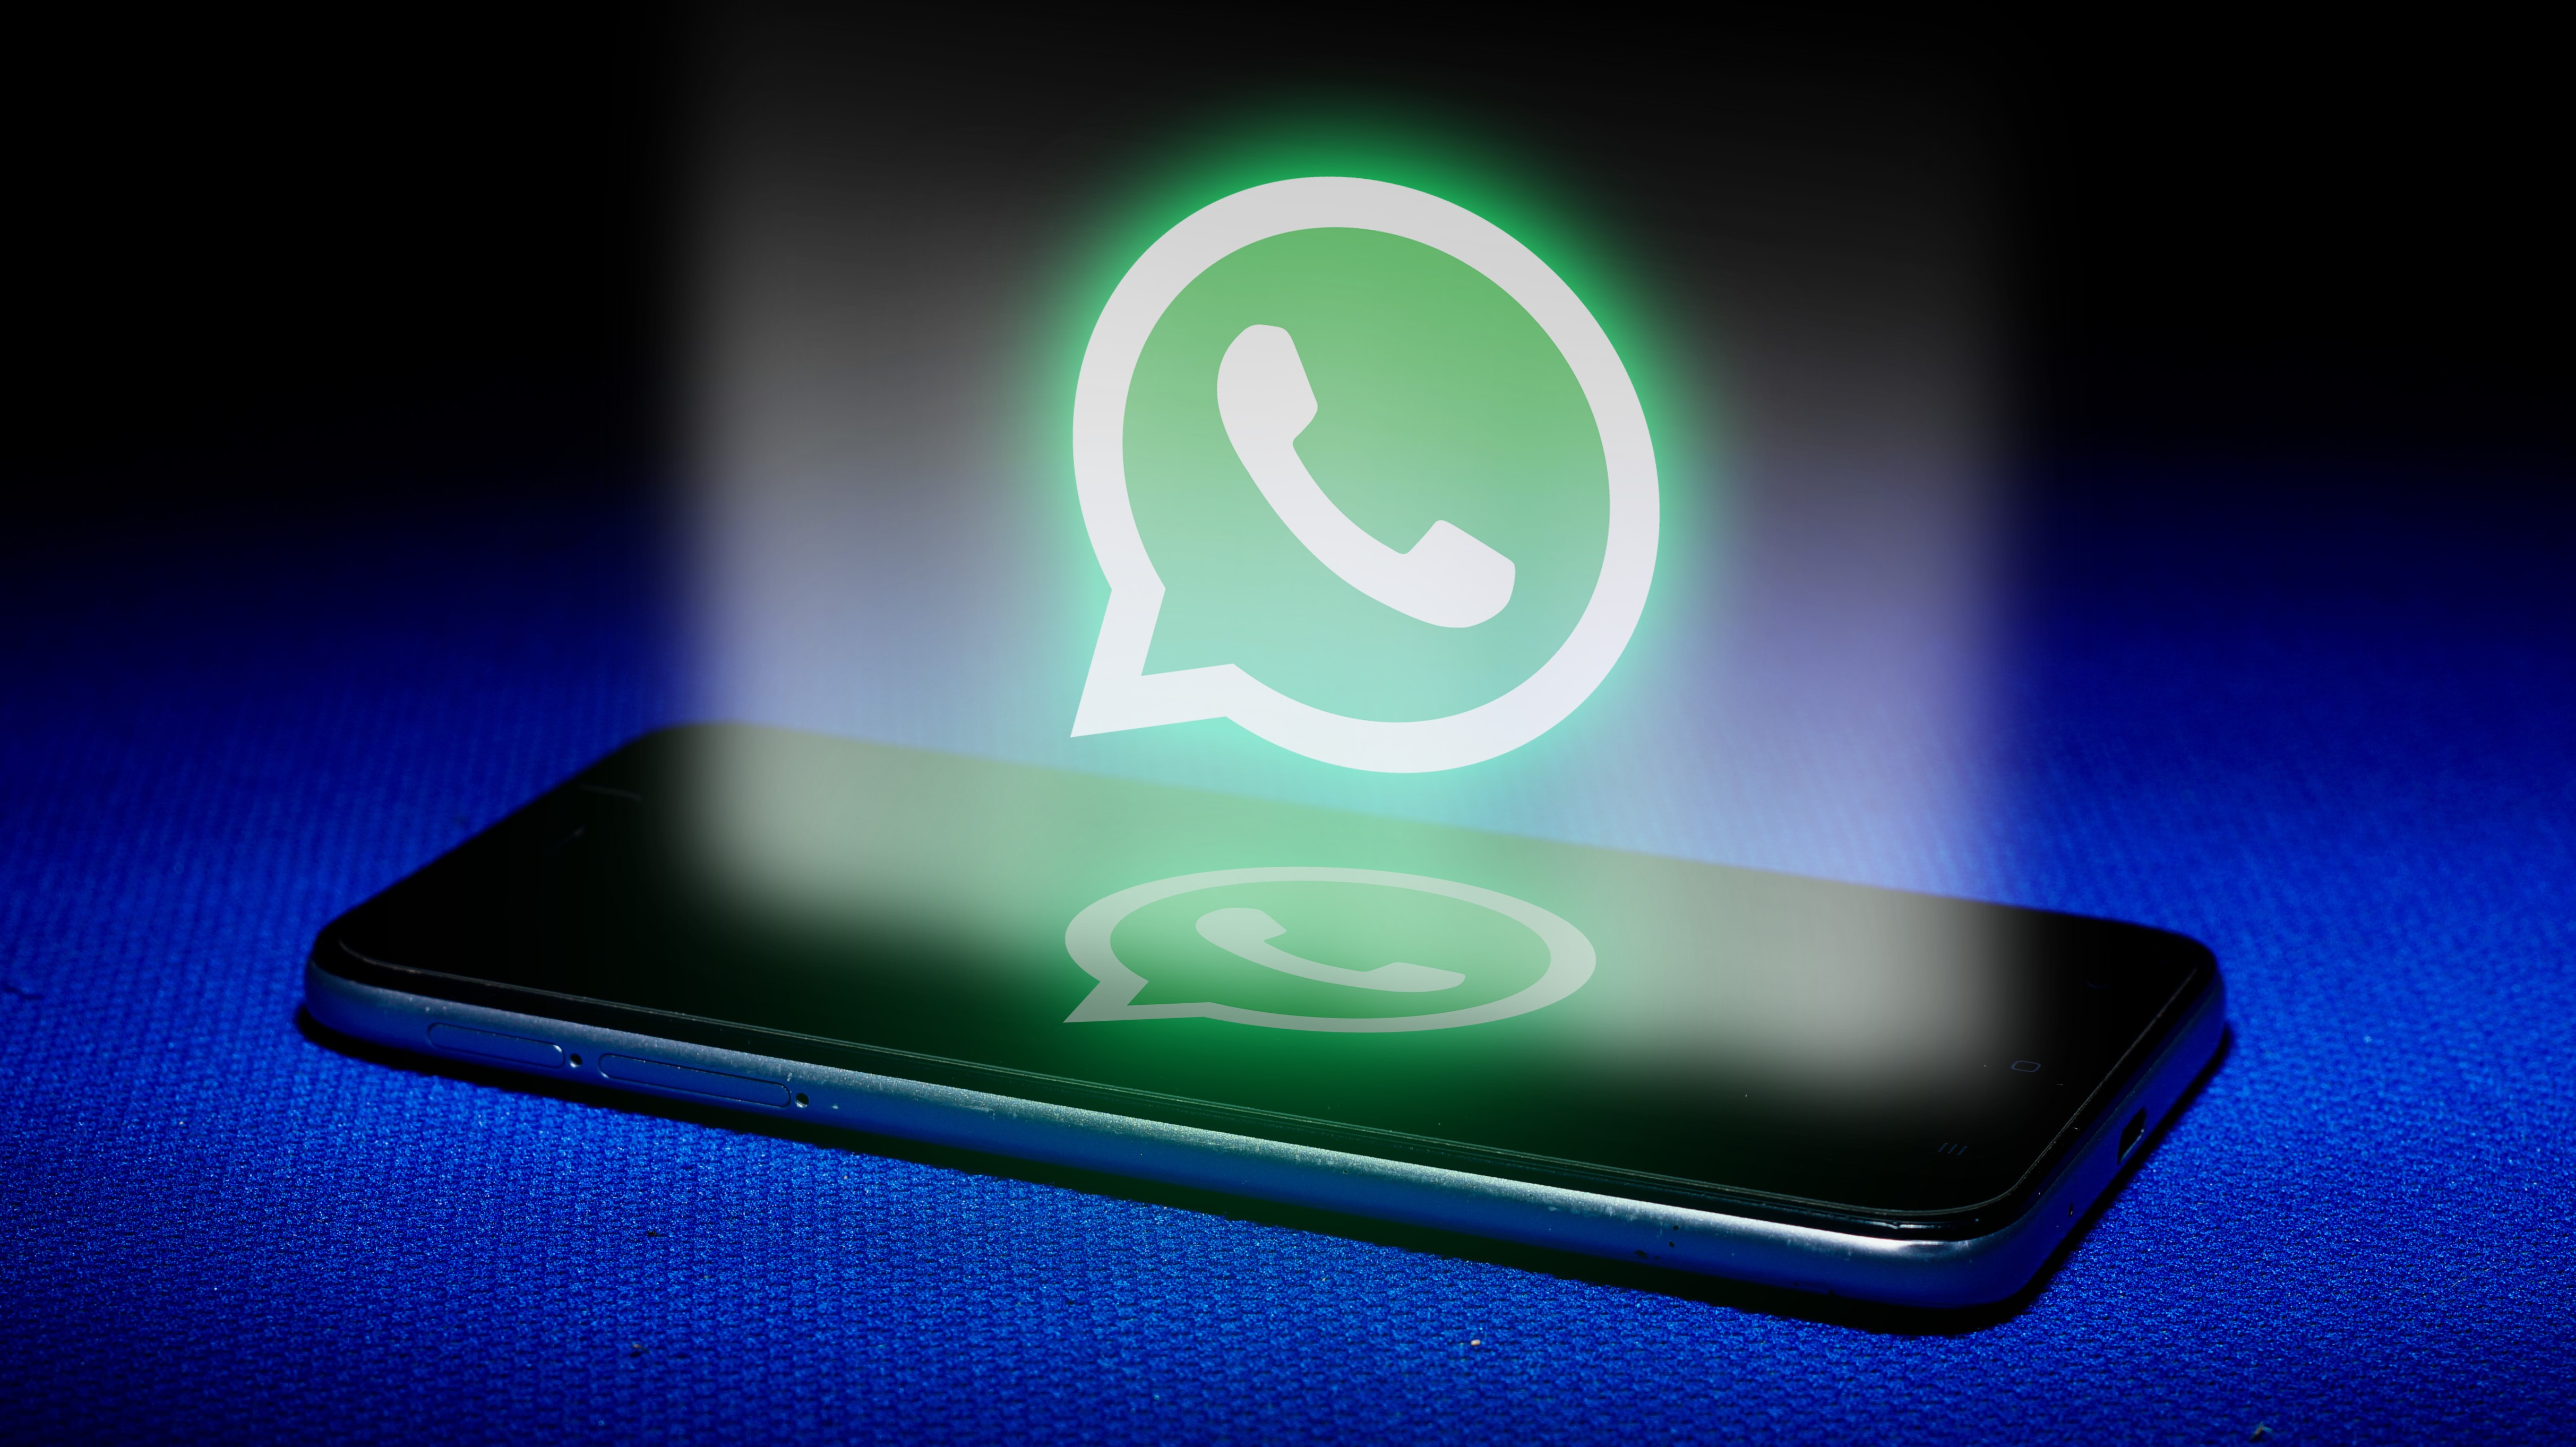 WhatsApp working on new feature to turn voice messages into text